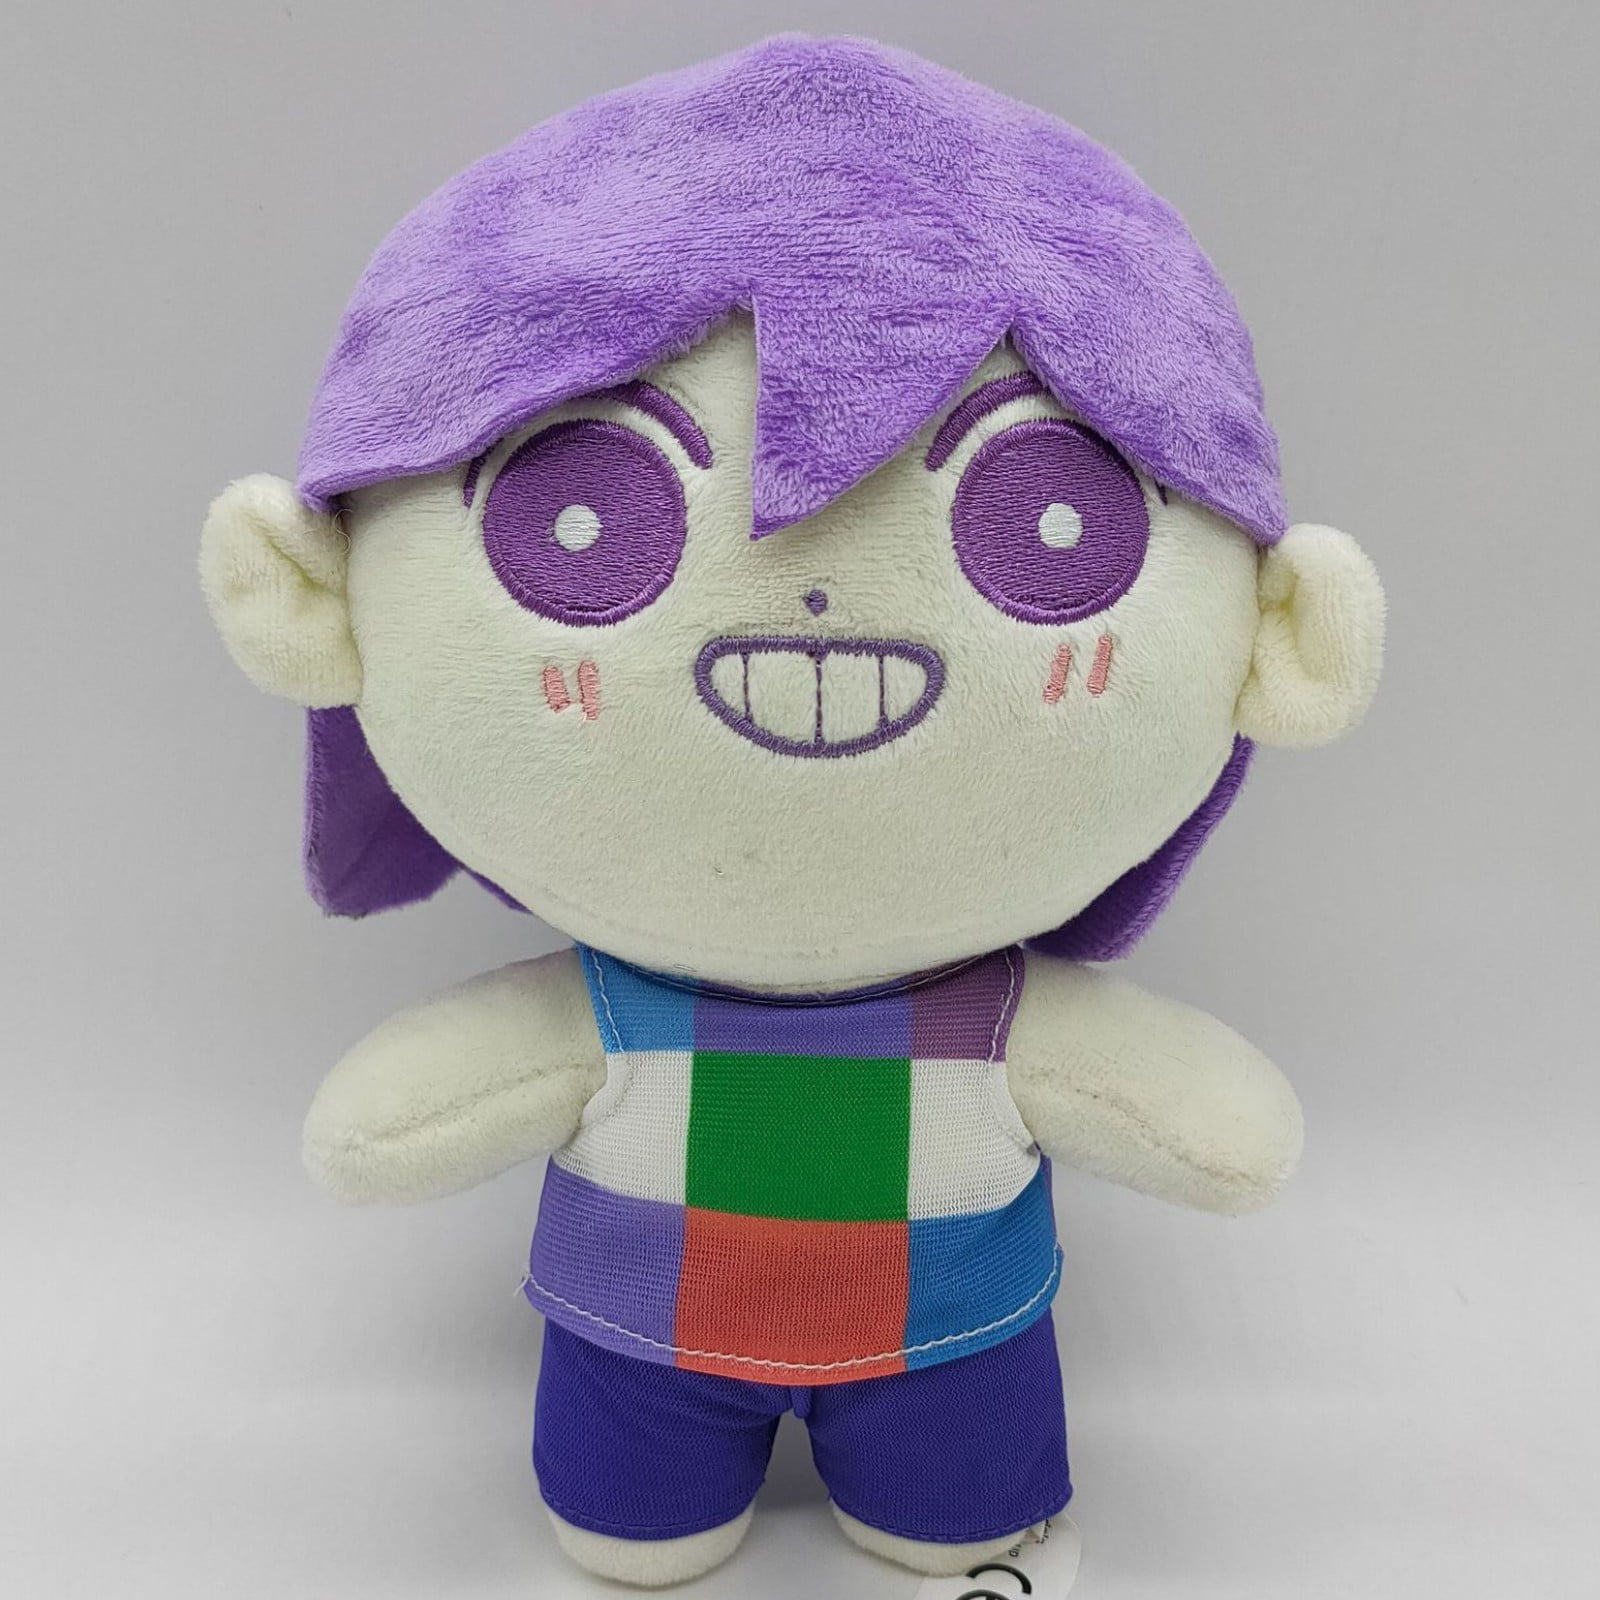  Omori Plush Game Figure Stuffed Pillow Anime Characters Cartoon  Cosplay Merch Prop for Gaming Fans : Toys & Games